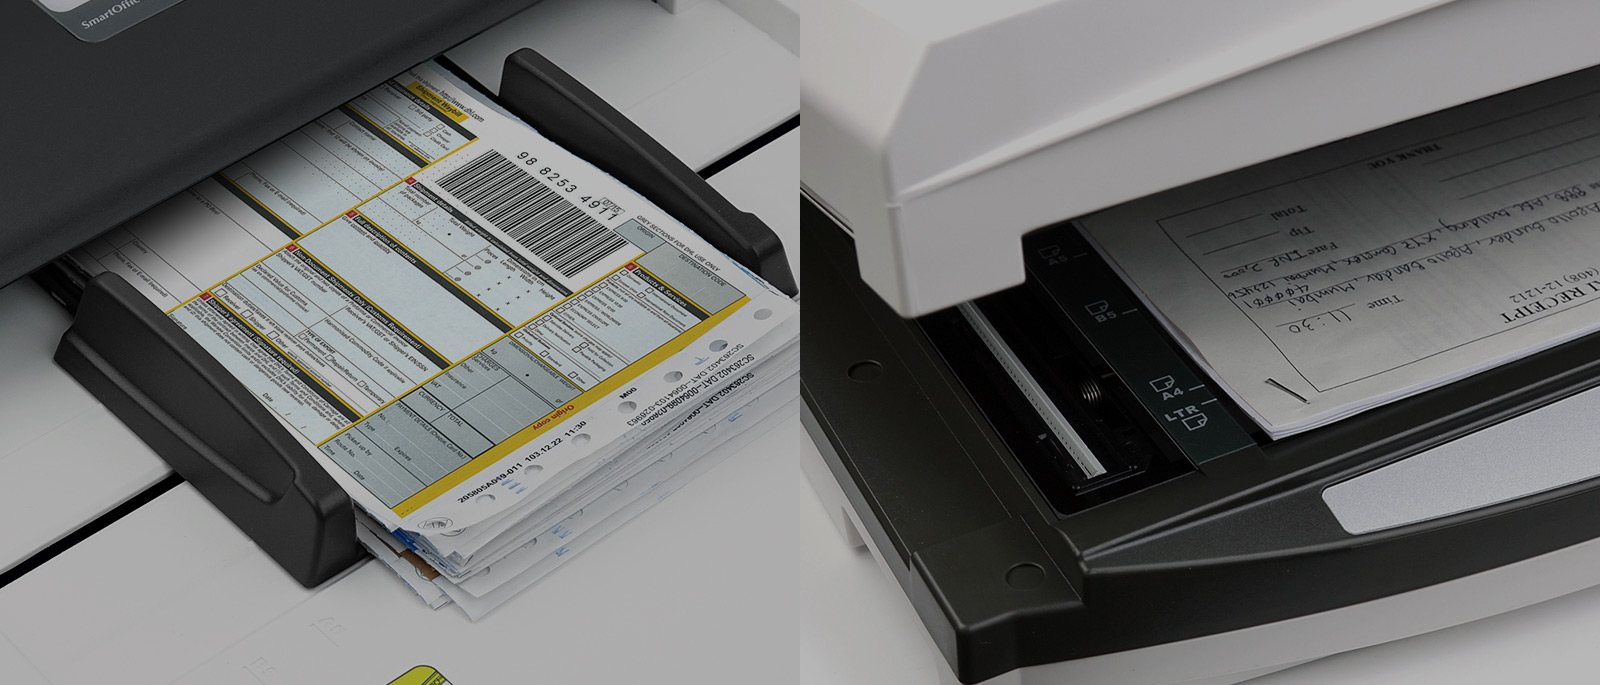  increase your productivity just now,with this amazing scanner